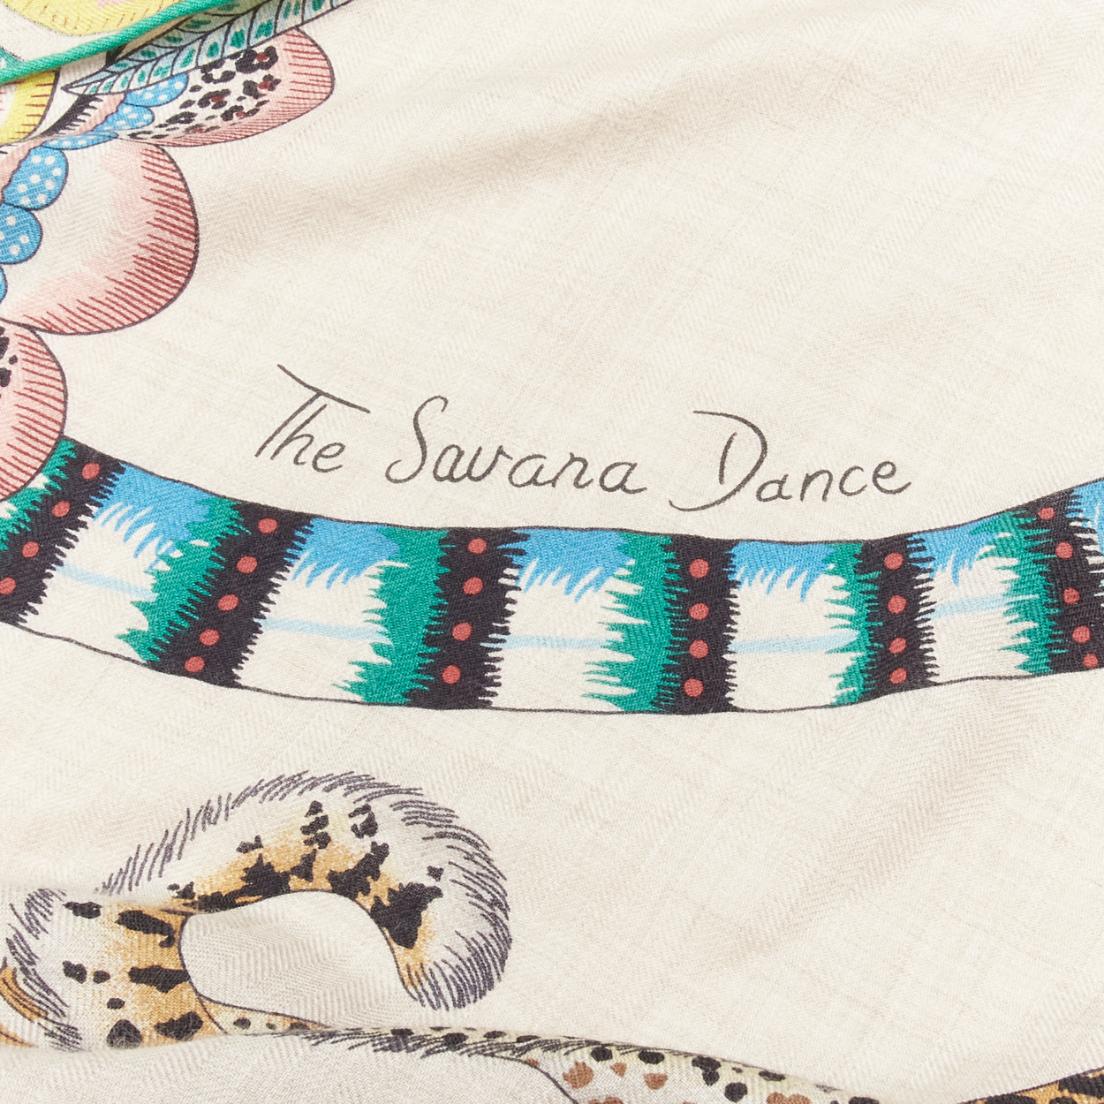 HERMES Ardmore Artists The Savana Dance 140 colorful cashmere silk graphic print shawl
Reference: JYLM/A00040
Brand: Hermes
Model: The Savana Dance 140
Collection: Ardmore Artists
Material: Cashmere, Silk
Color: Multicolour
Pattern: Floral
Made in: